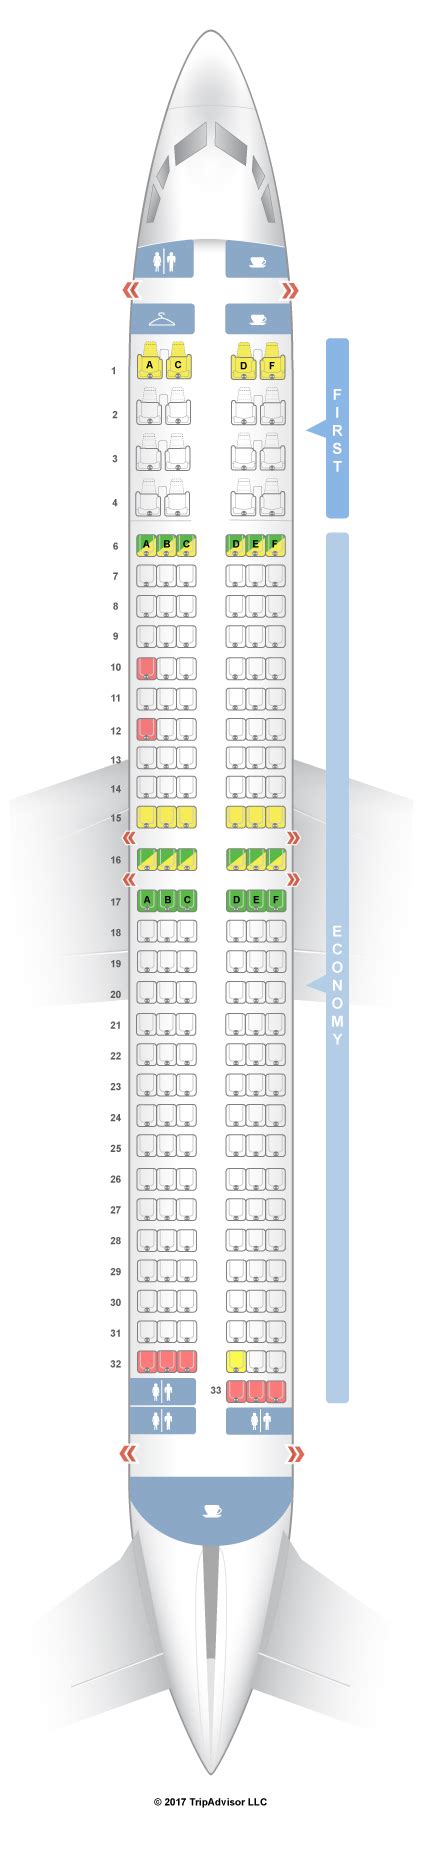 Contact information for renew-deutschland.de - Boeing 737-900 (739) Seat Map. Info. Photos. Click any seat for more information. Key.